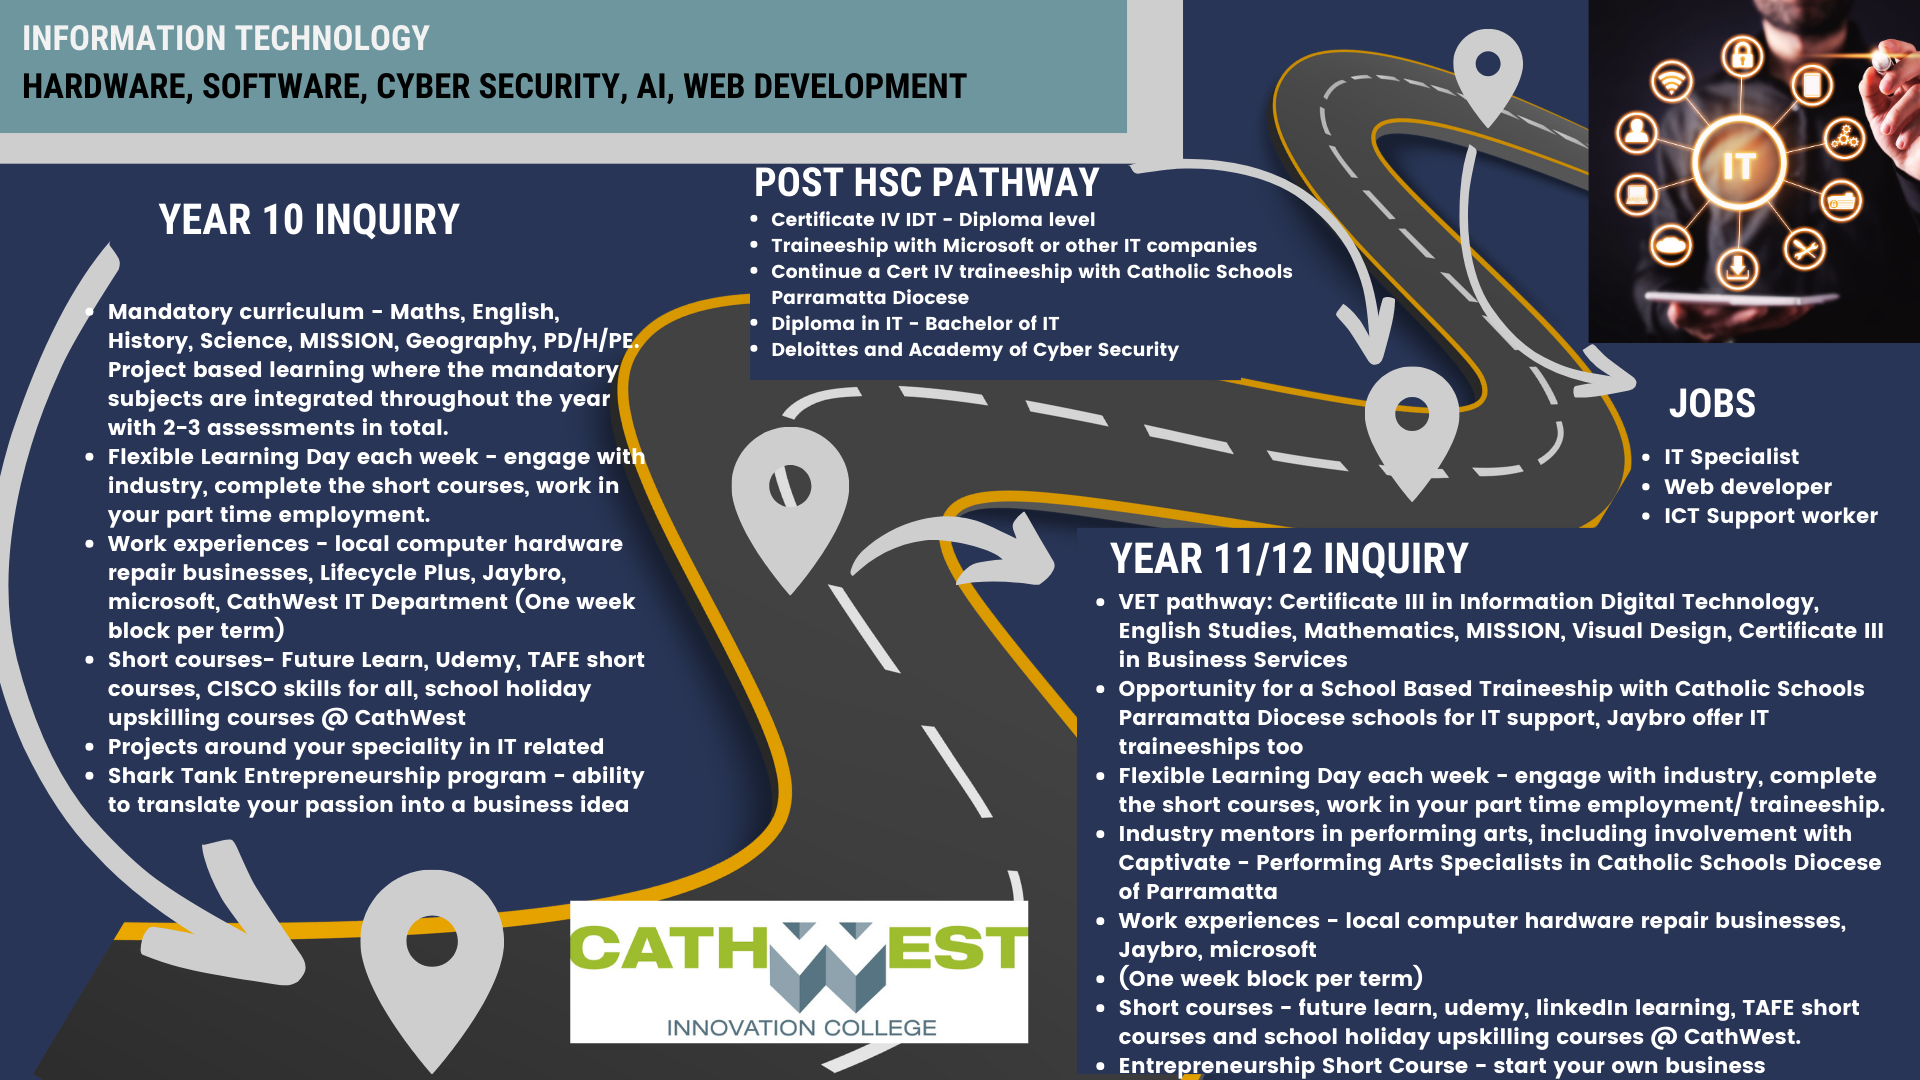 Information Technology Career Pathways at CathWest Innovation College